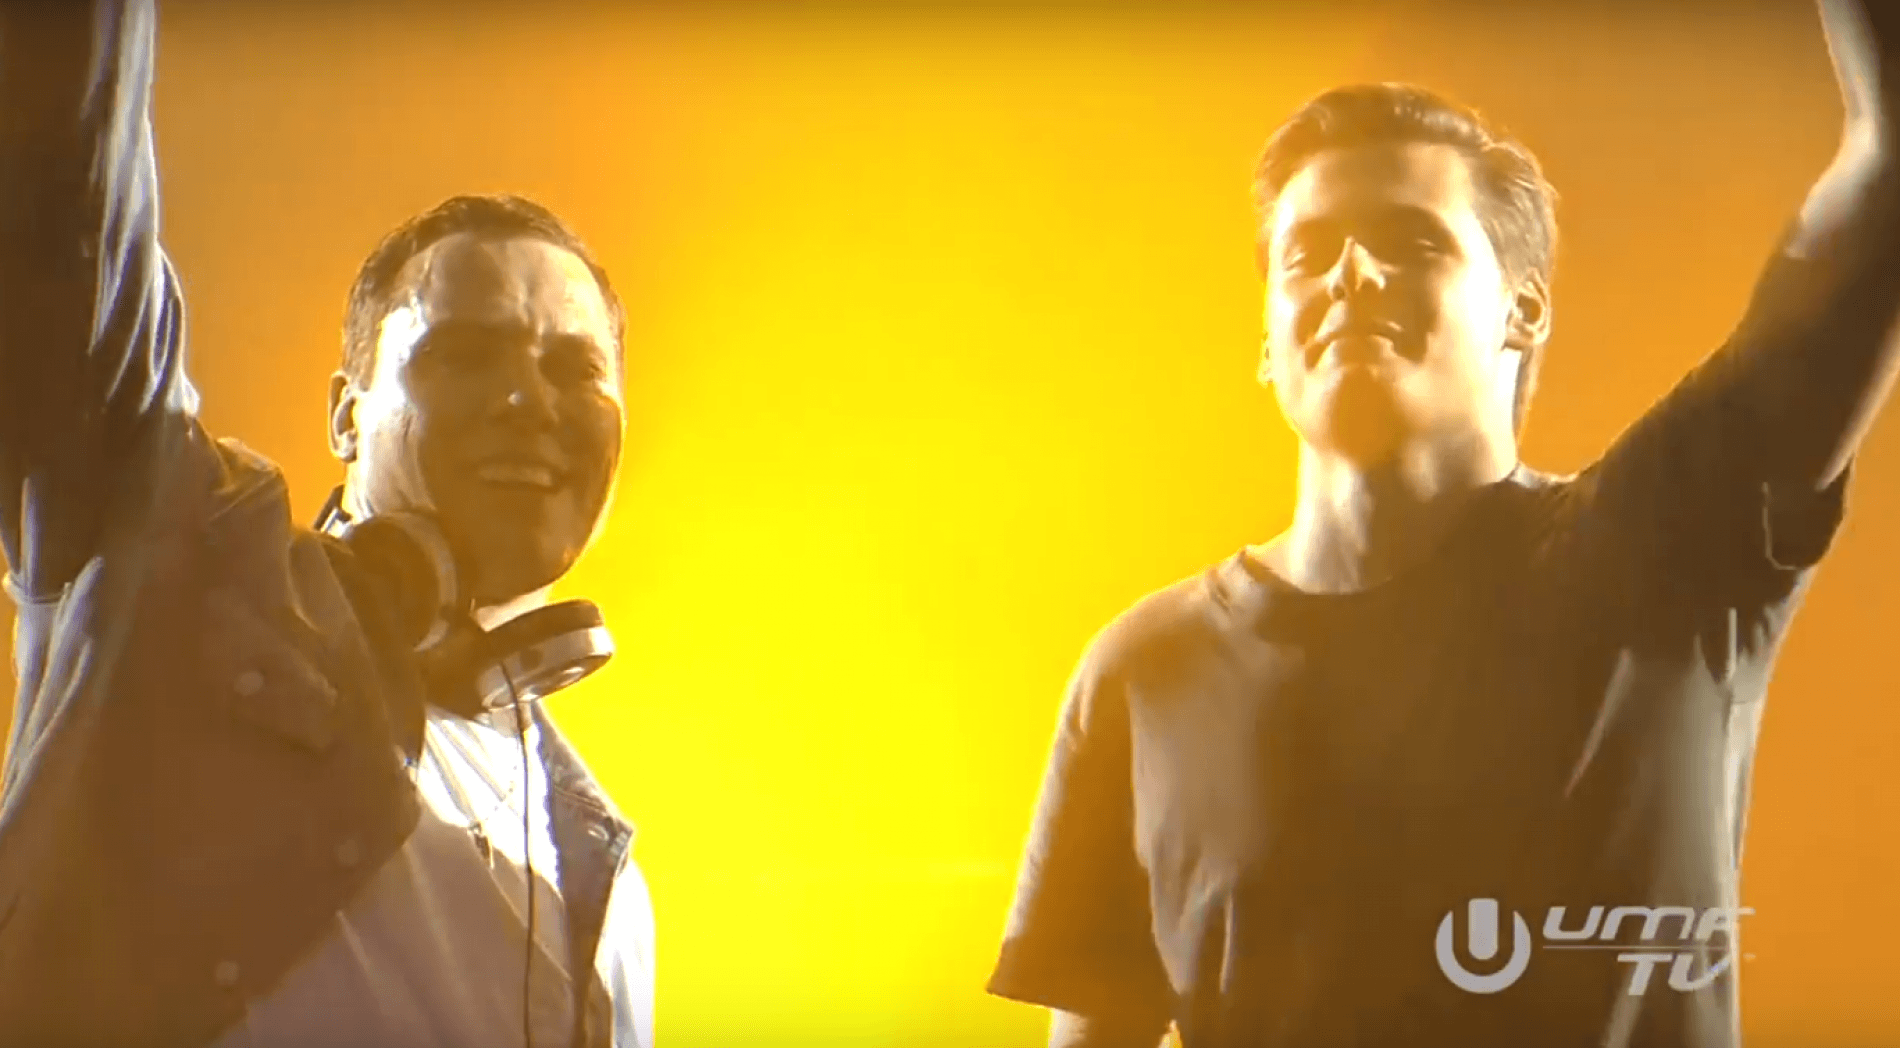 Watch Tiësto and Mike Williams at Ultra Music Festival Miami